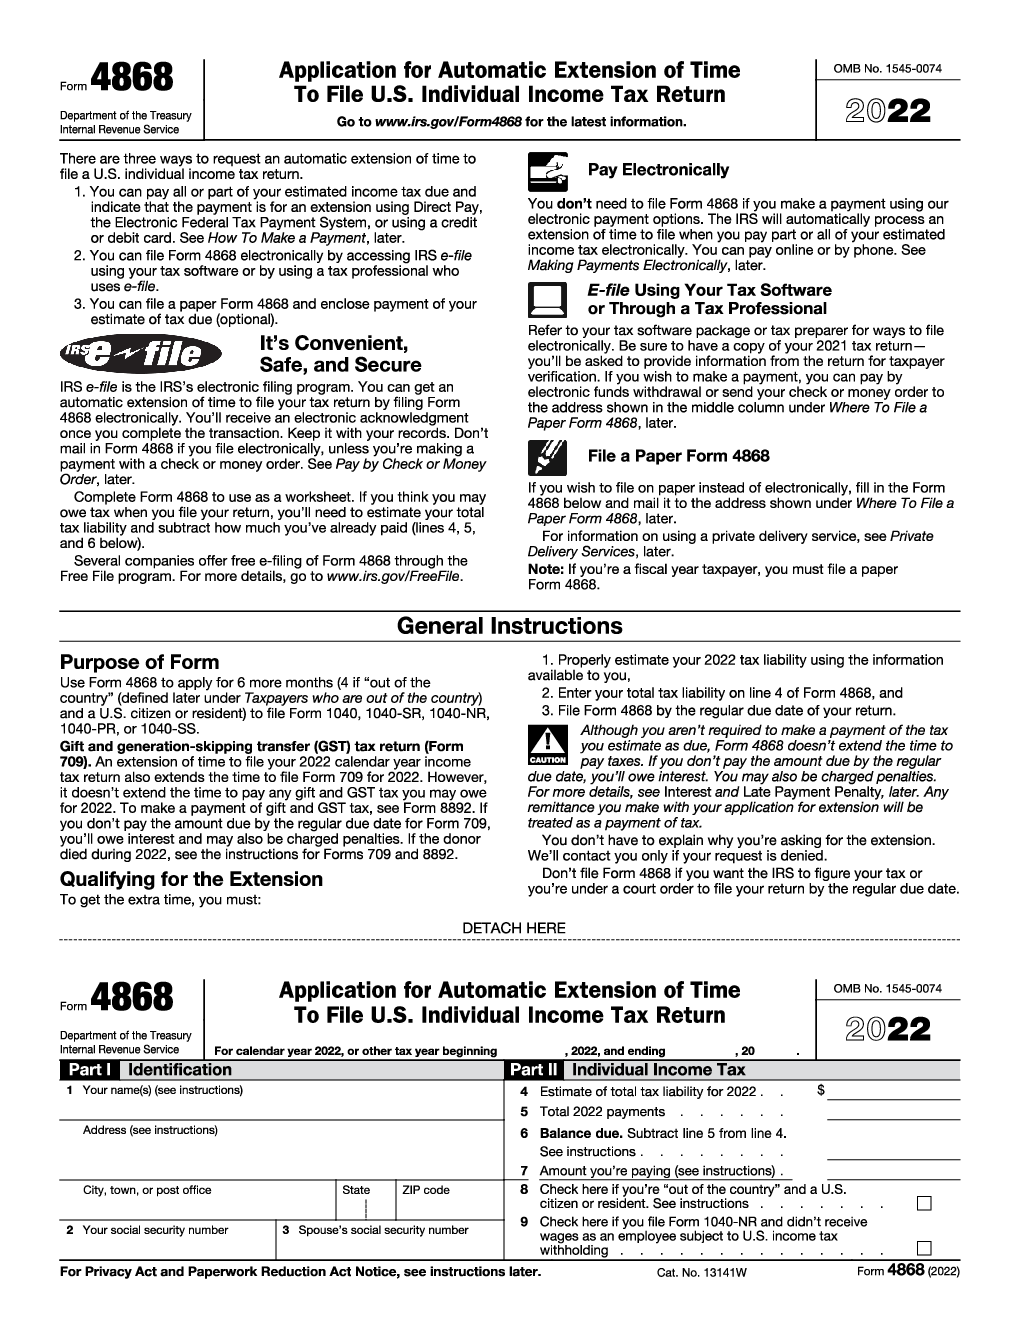 irs-form-4868-application-for-automatic-extension-of-time-to-file-u-s